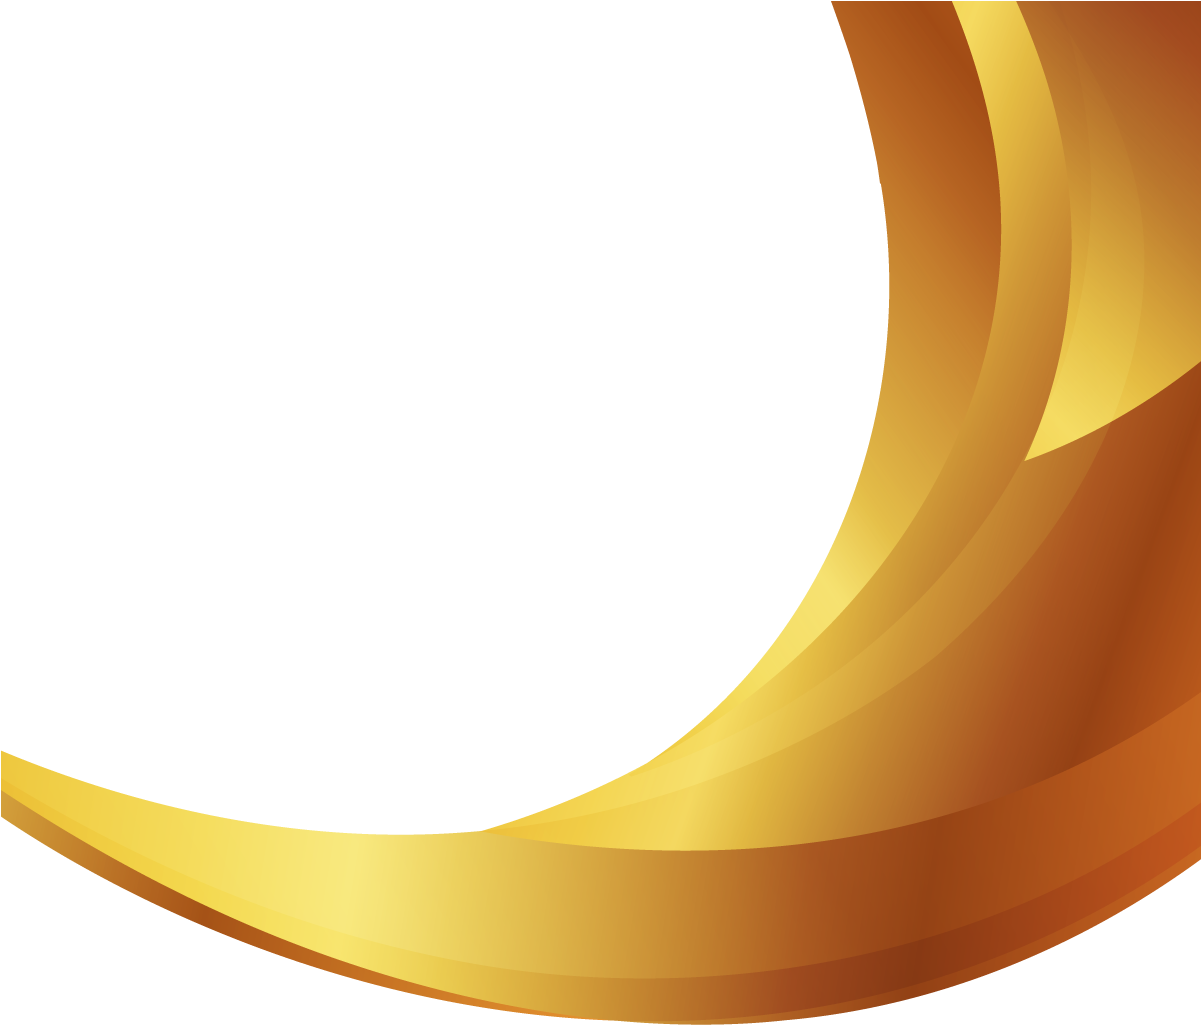 A Gold Curved Object With A Black Background